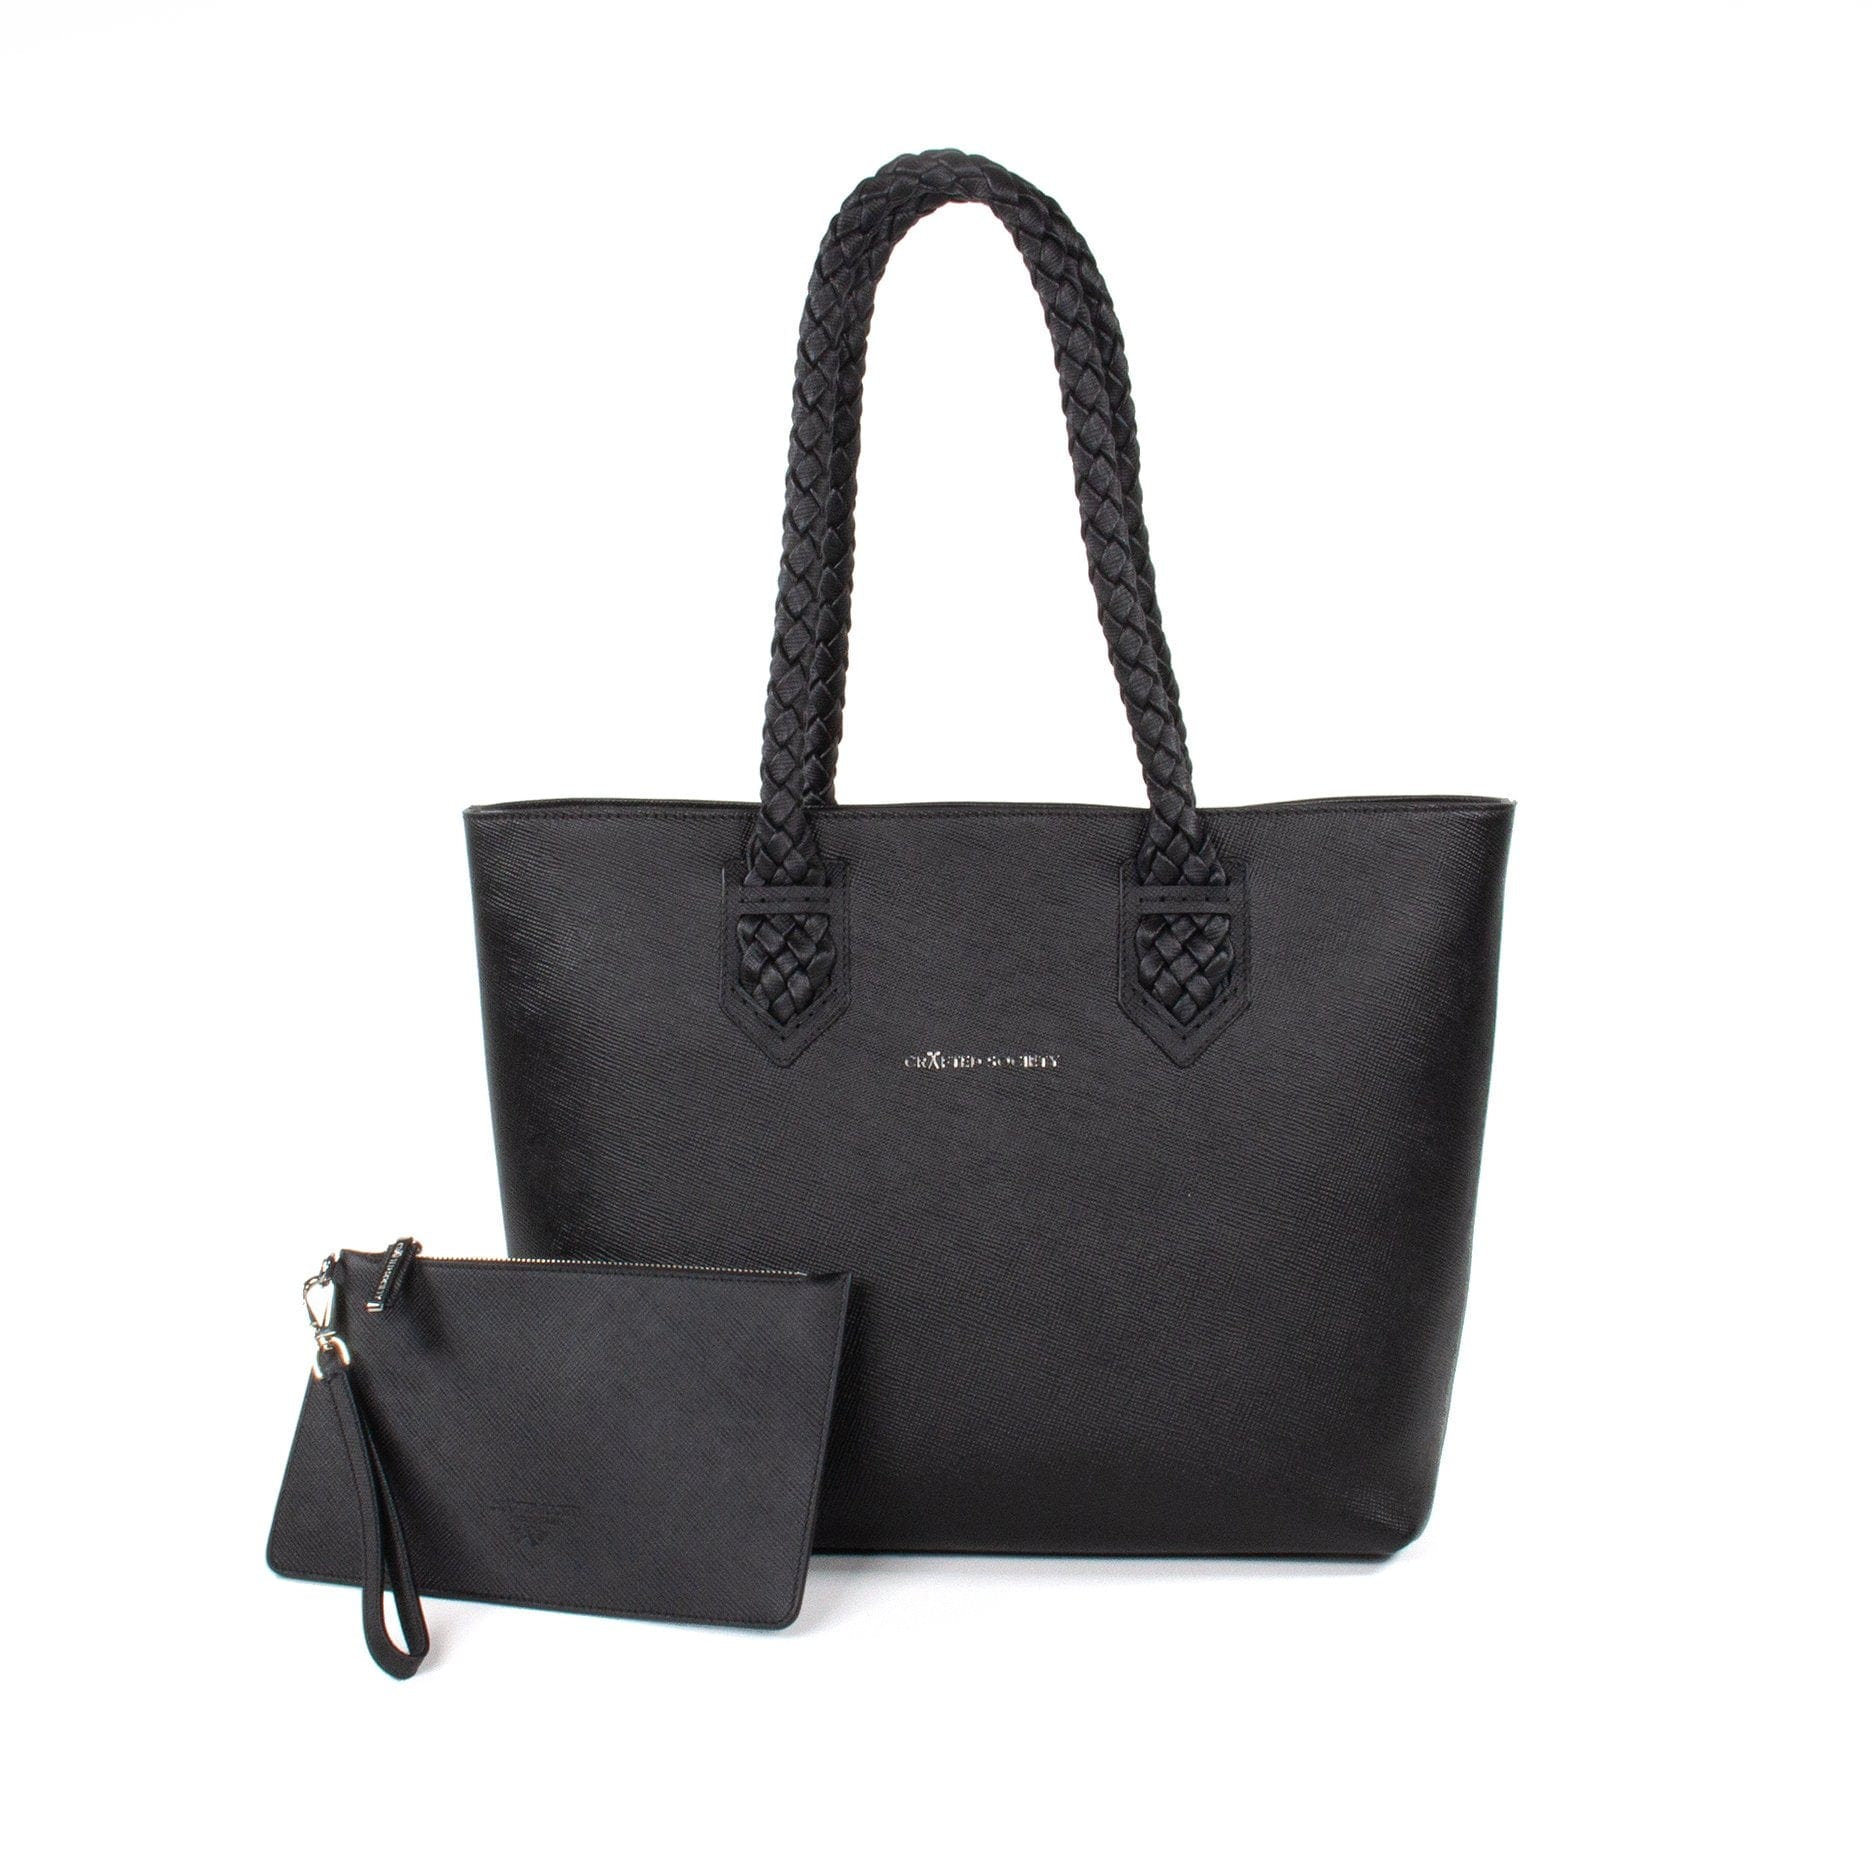 Luisa Tote Black Saffiano Leather with Leather Pouch Sideview